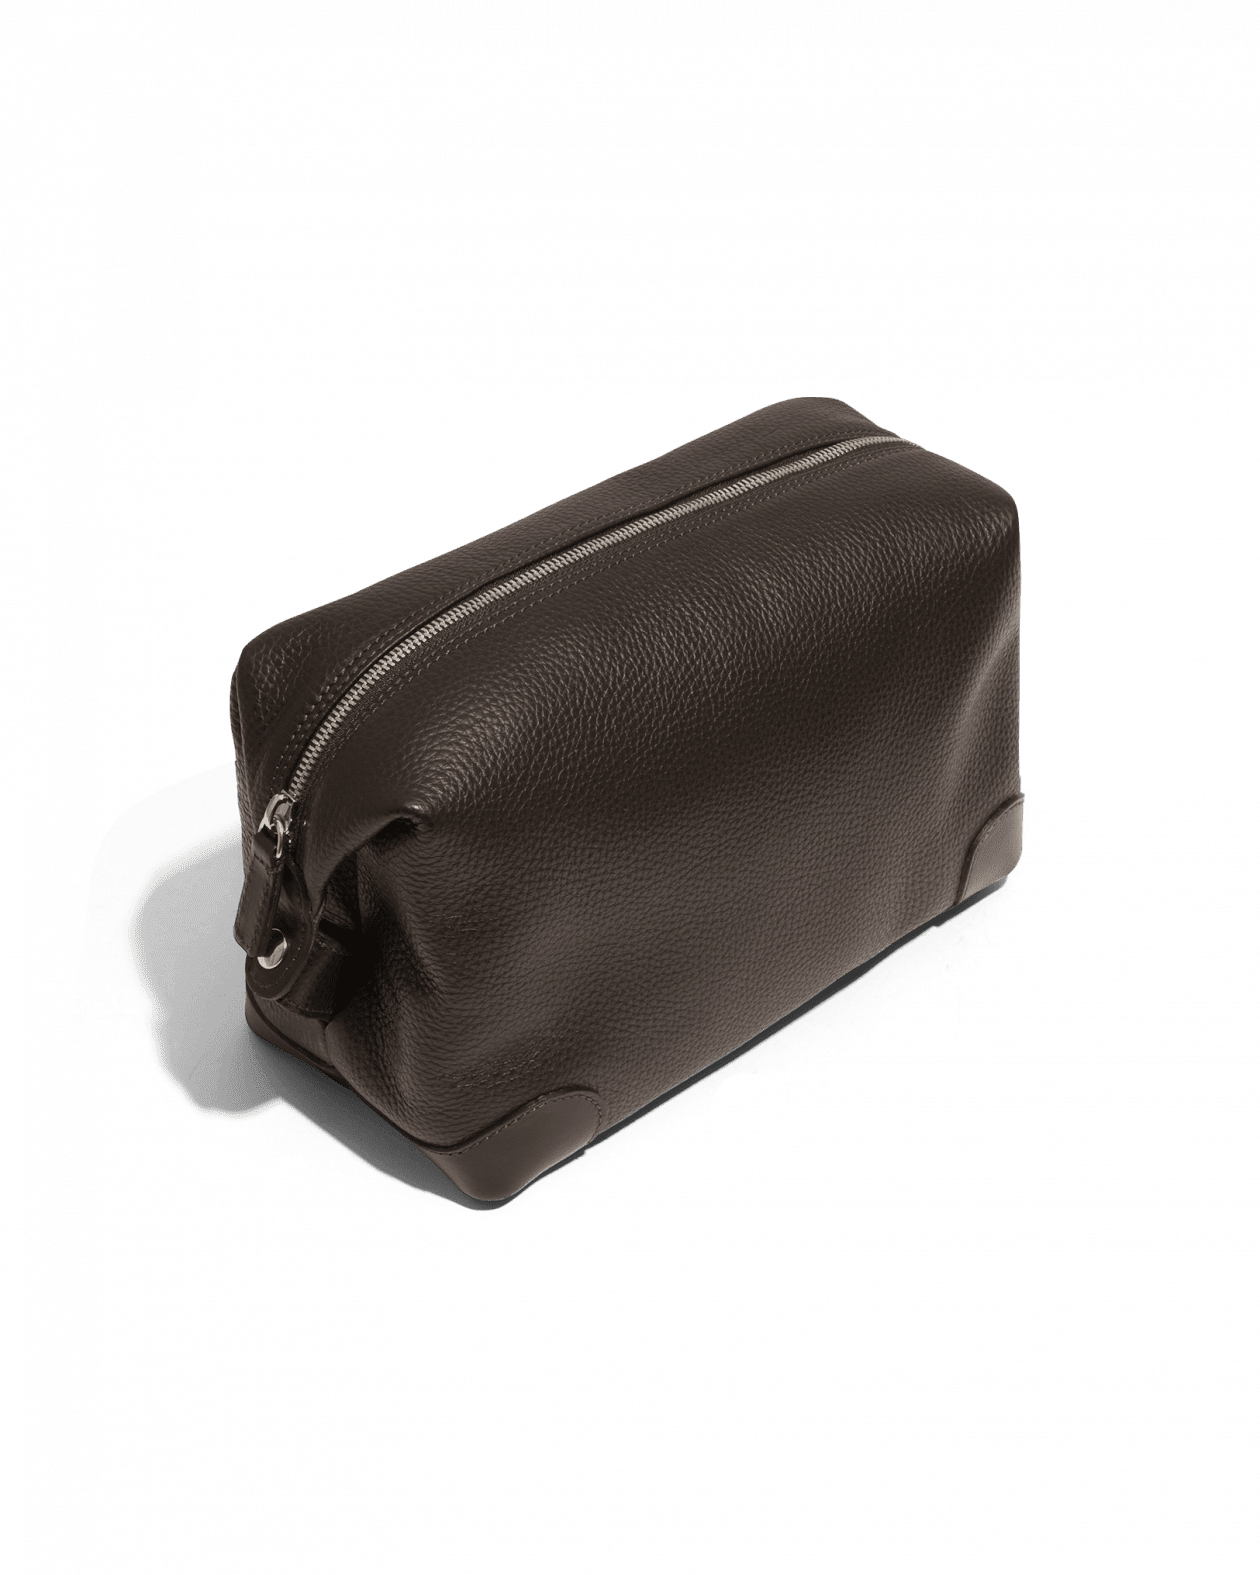 Wash Bag Brown Calf Leather Single Compartment